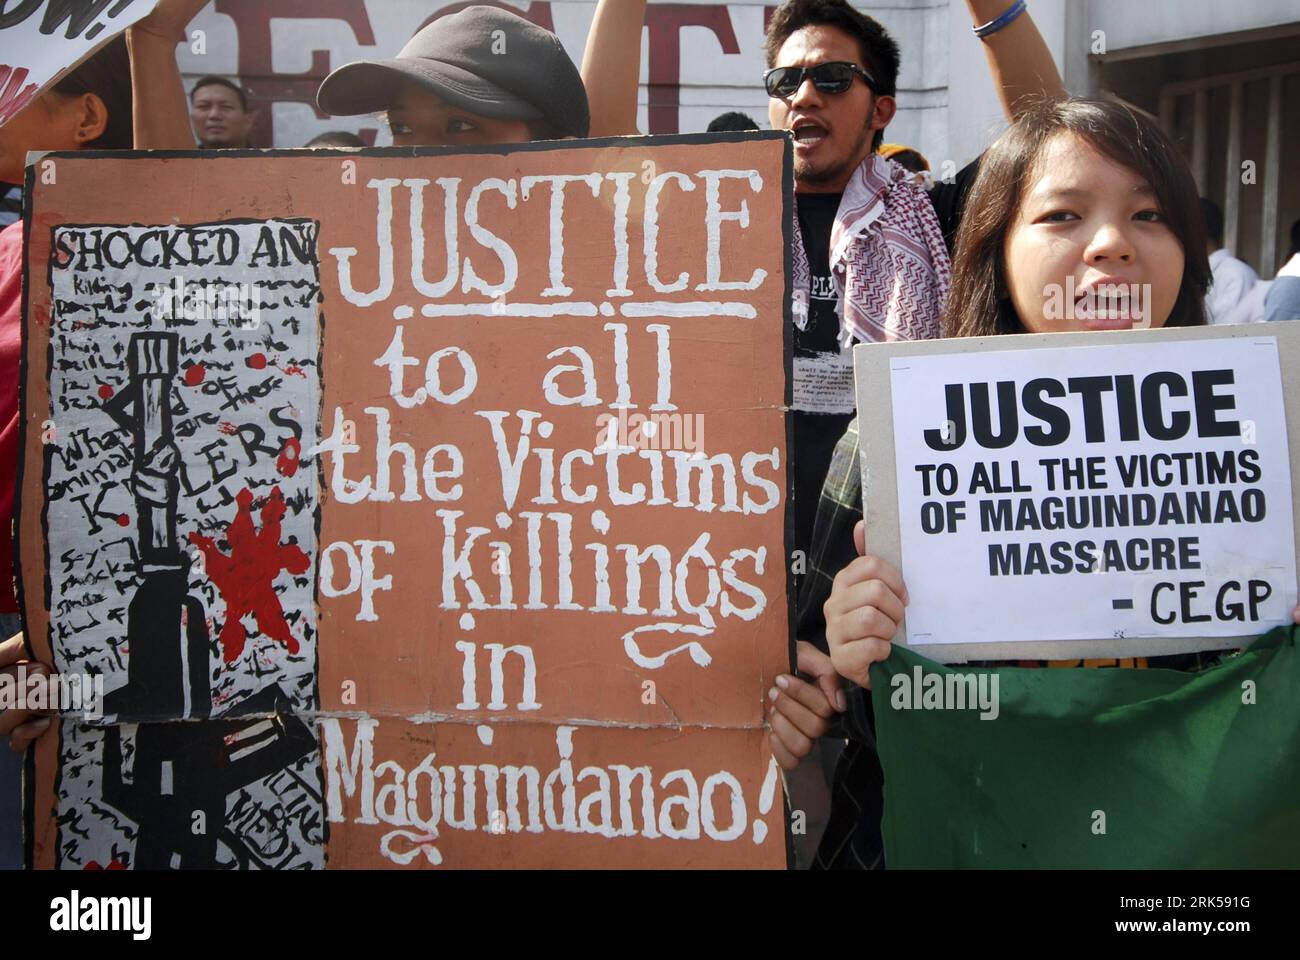 Bildnummer: 53724064  Datum: 13.01.2010  Copyright: imago/Xinhua Protesters hold placards with slogans during a rally calling for justice for victims of Maguindanao massacre in front of the Philippine National Police (PNP) Headquarters in Quezon City northeast of Manila, Philippines, Jan. 13, 2010. The second hearing of Andal Ampatuan, Jr., the principal accussed in the Maguindanao massacre in Mindanao was held here on Wednesday, and a witness testified that he saw a member of a powerful clan and his relatives firing their guns as journalists and women among 57 victims knelt and begged for the Stock Photo